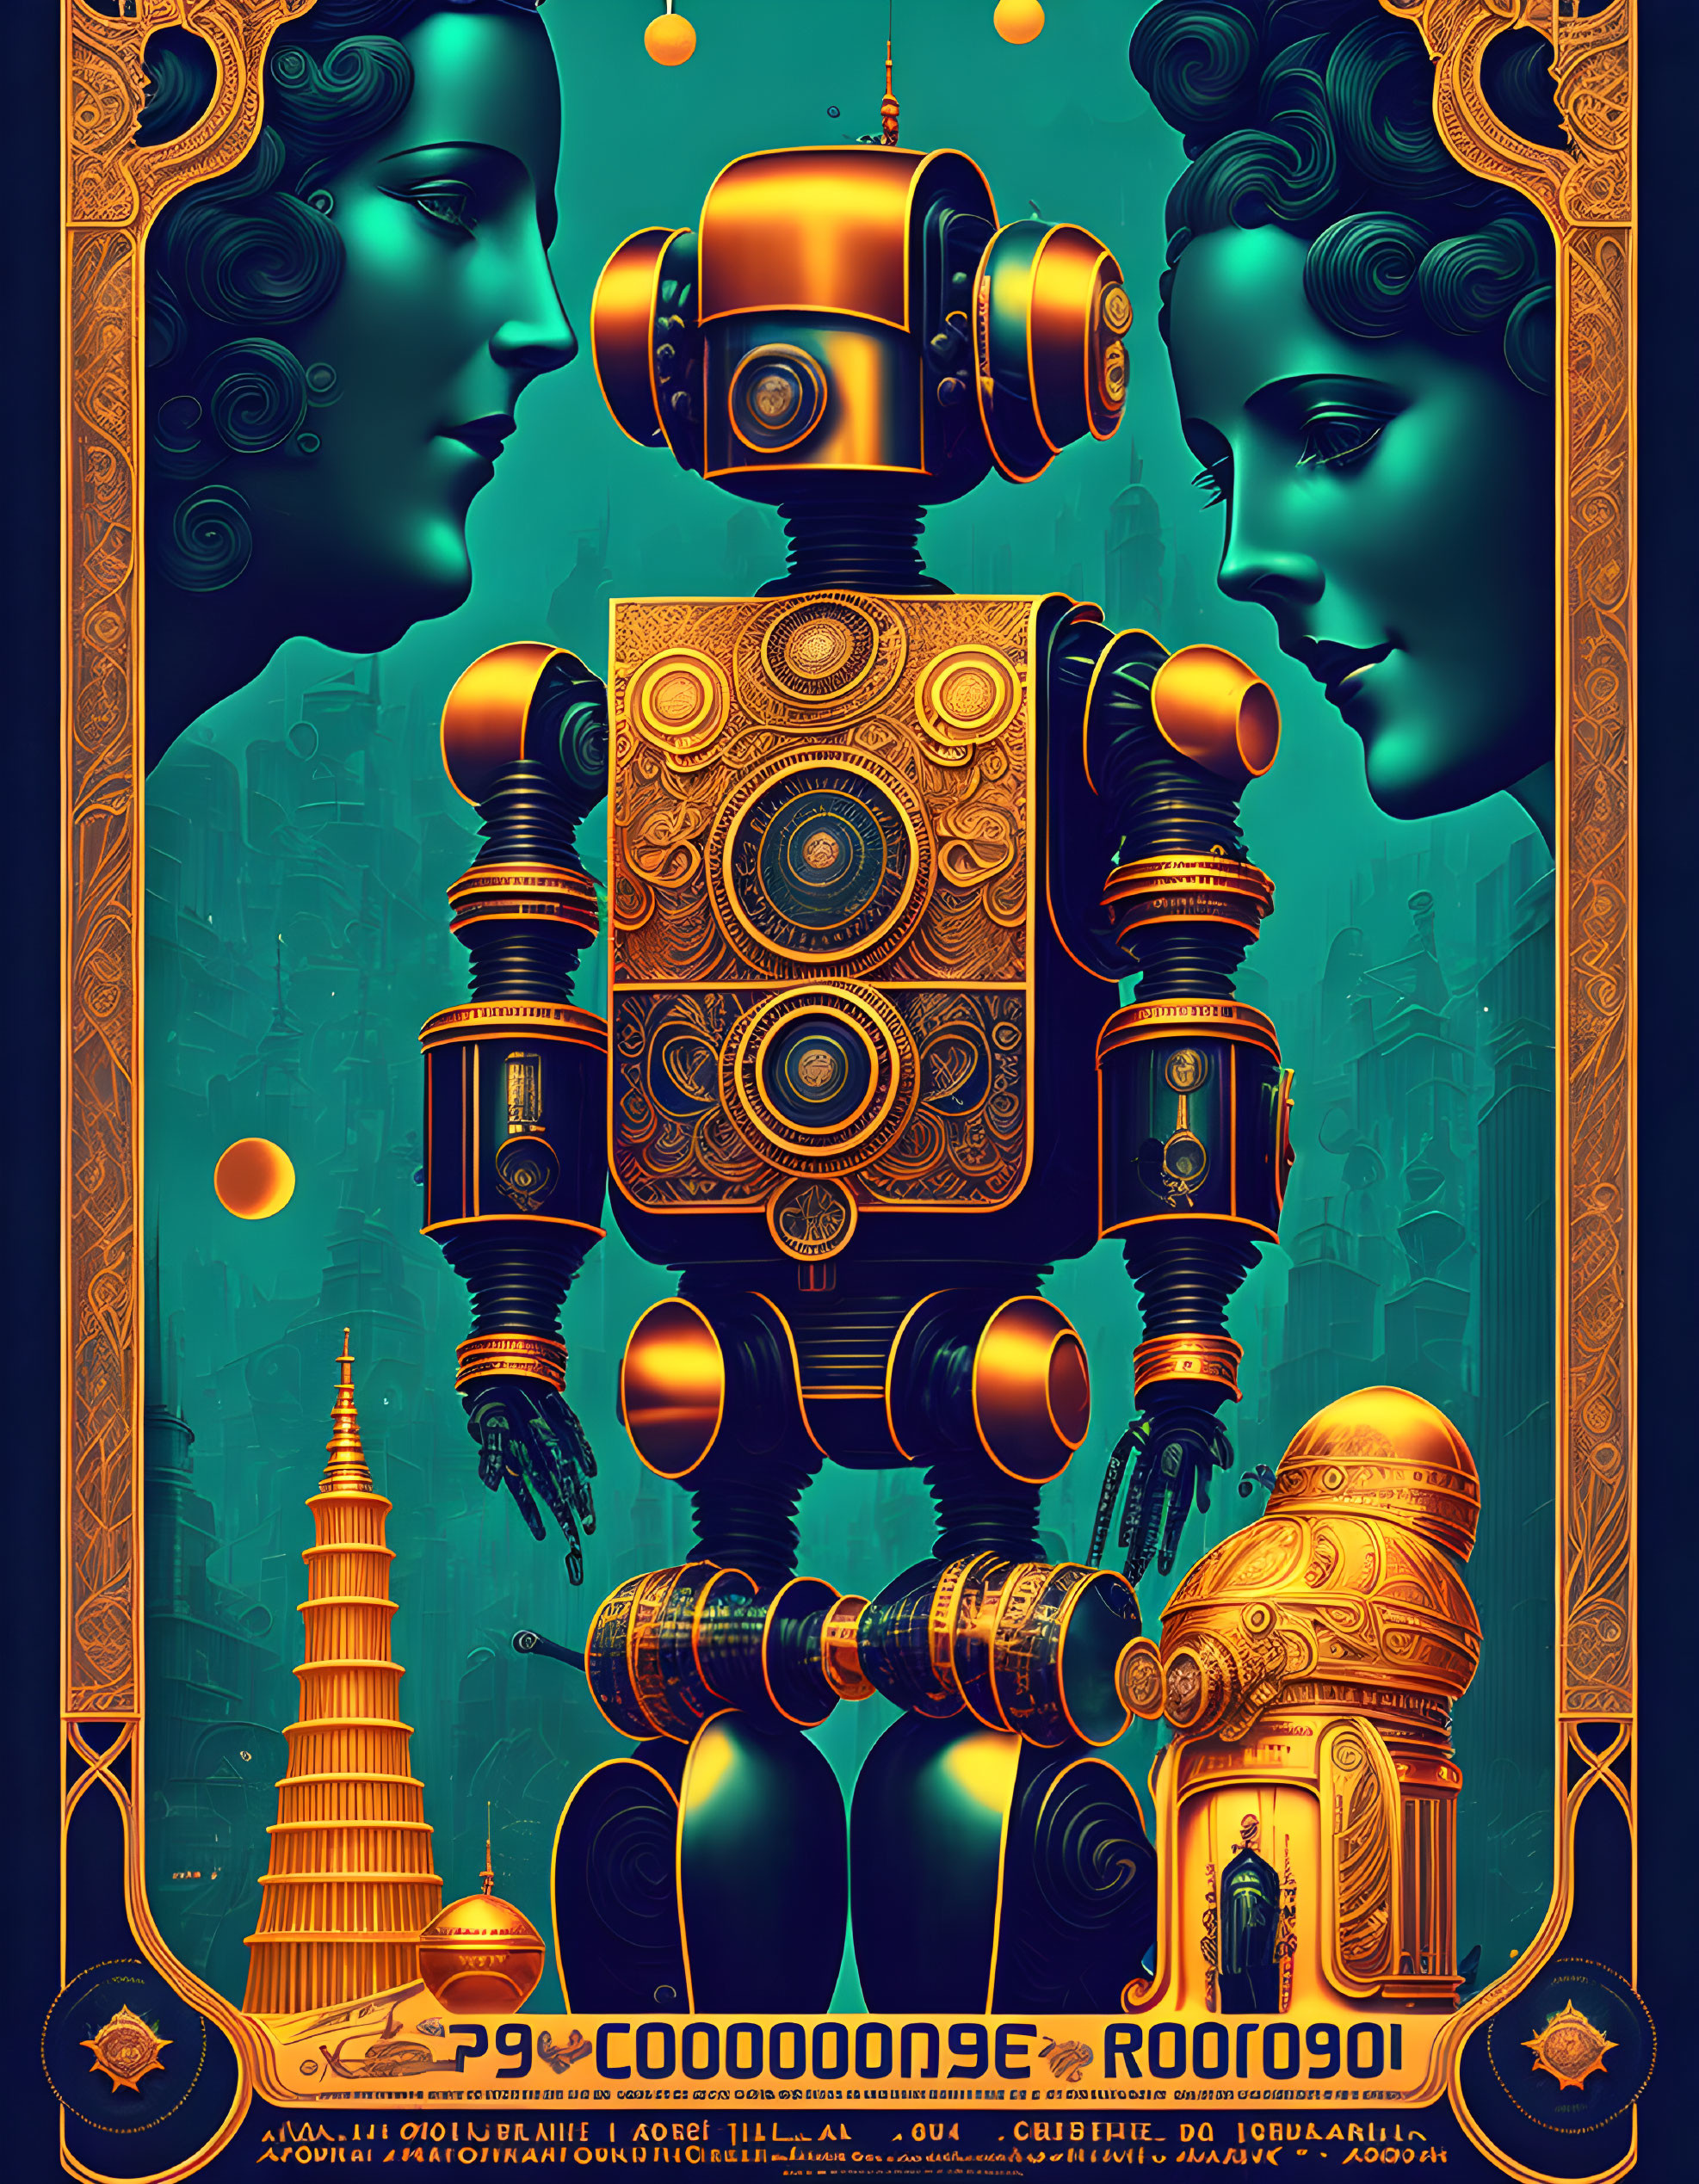 Symmetrical female profiles and ornate robot in art deco style illustration